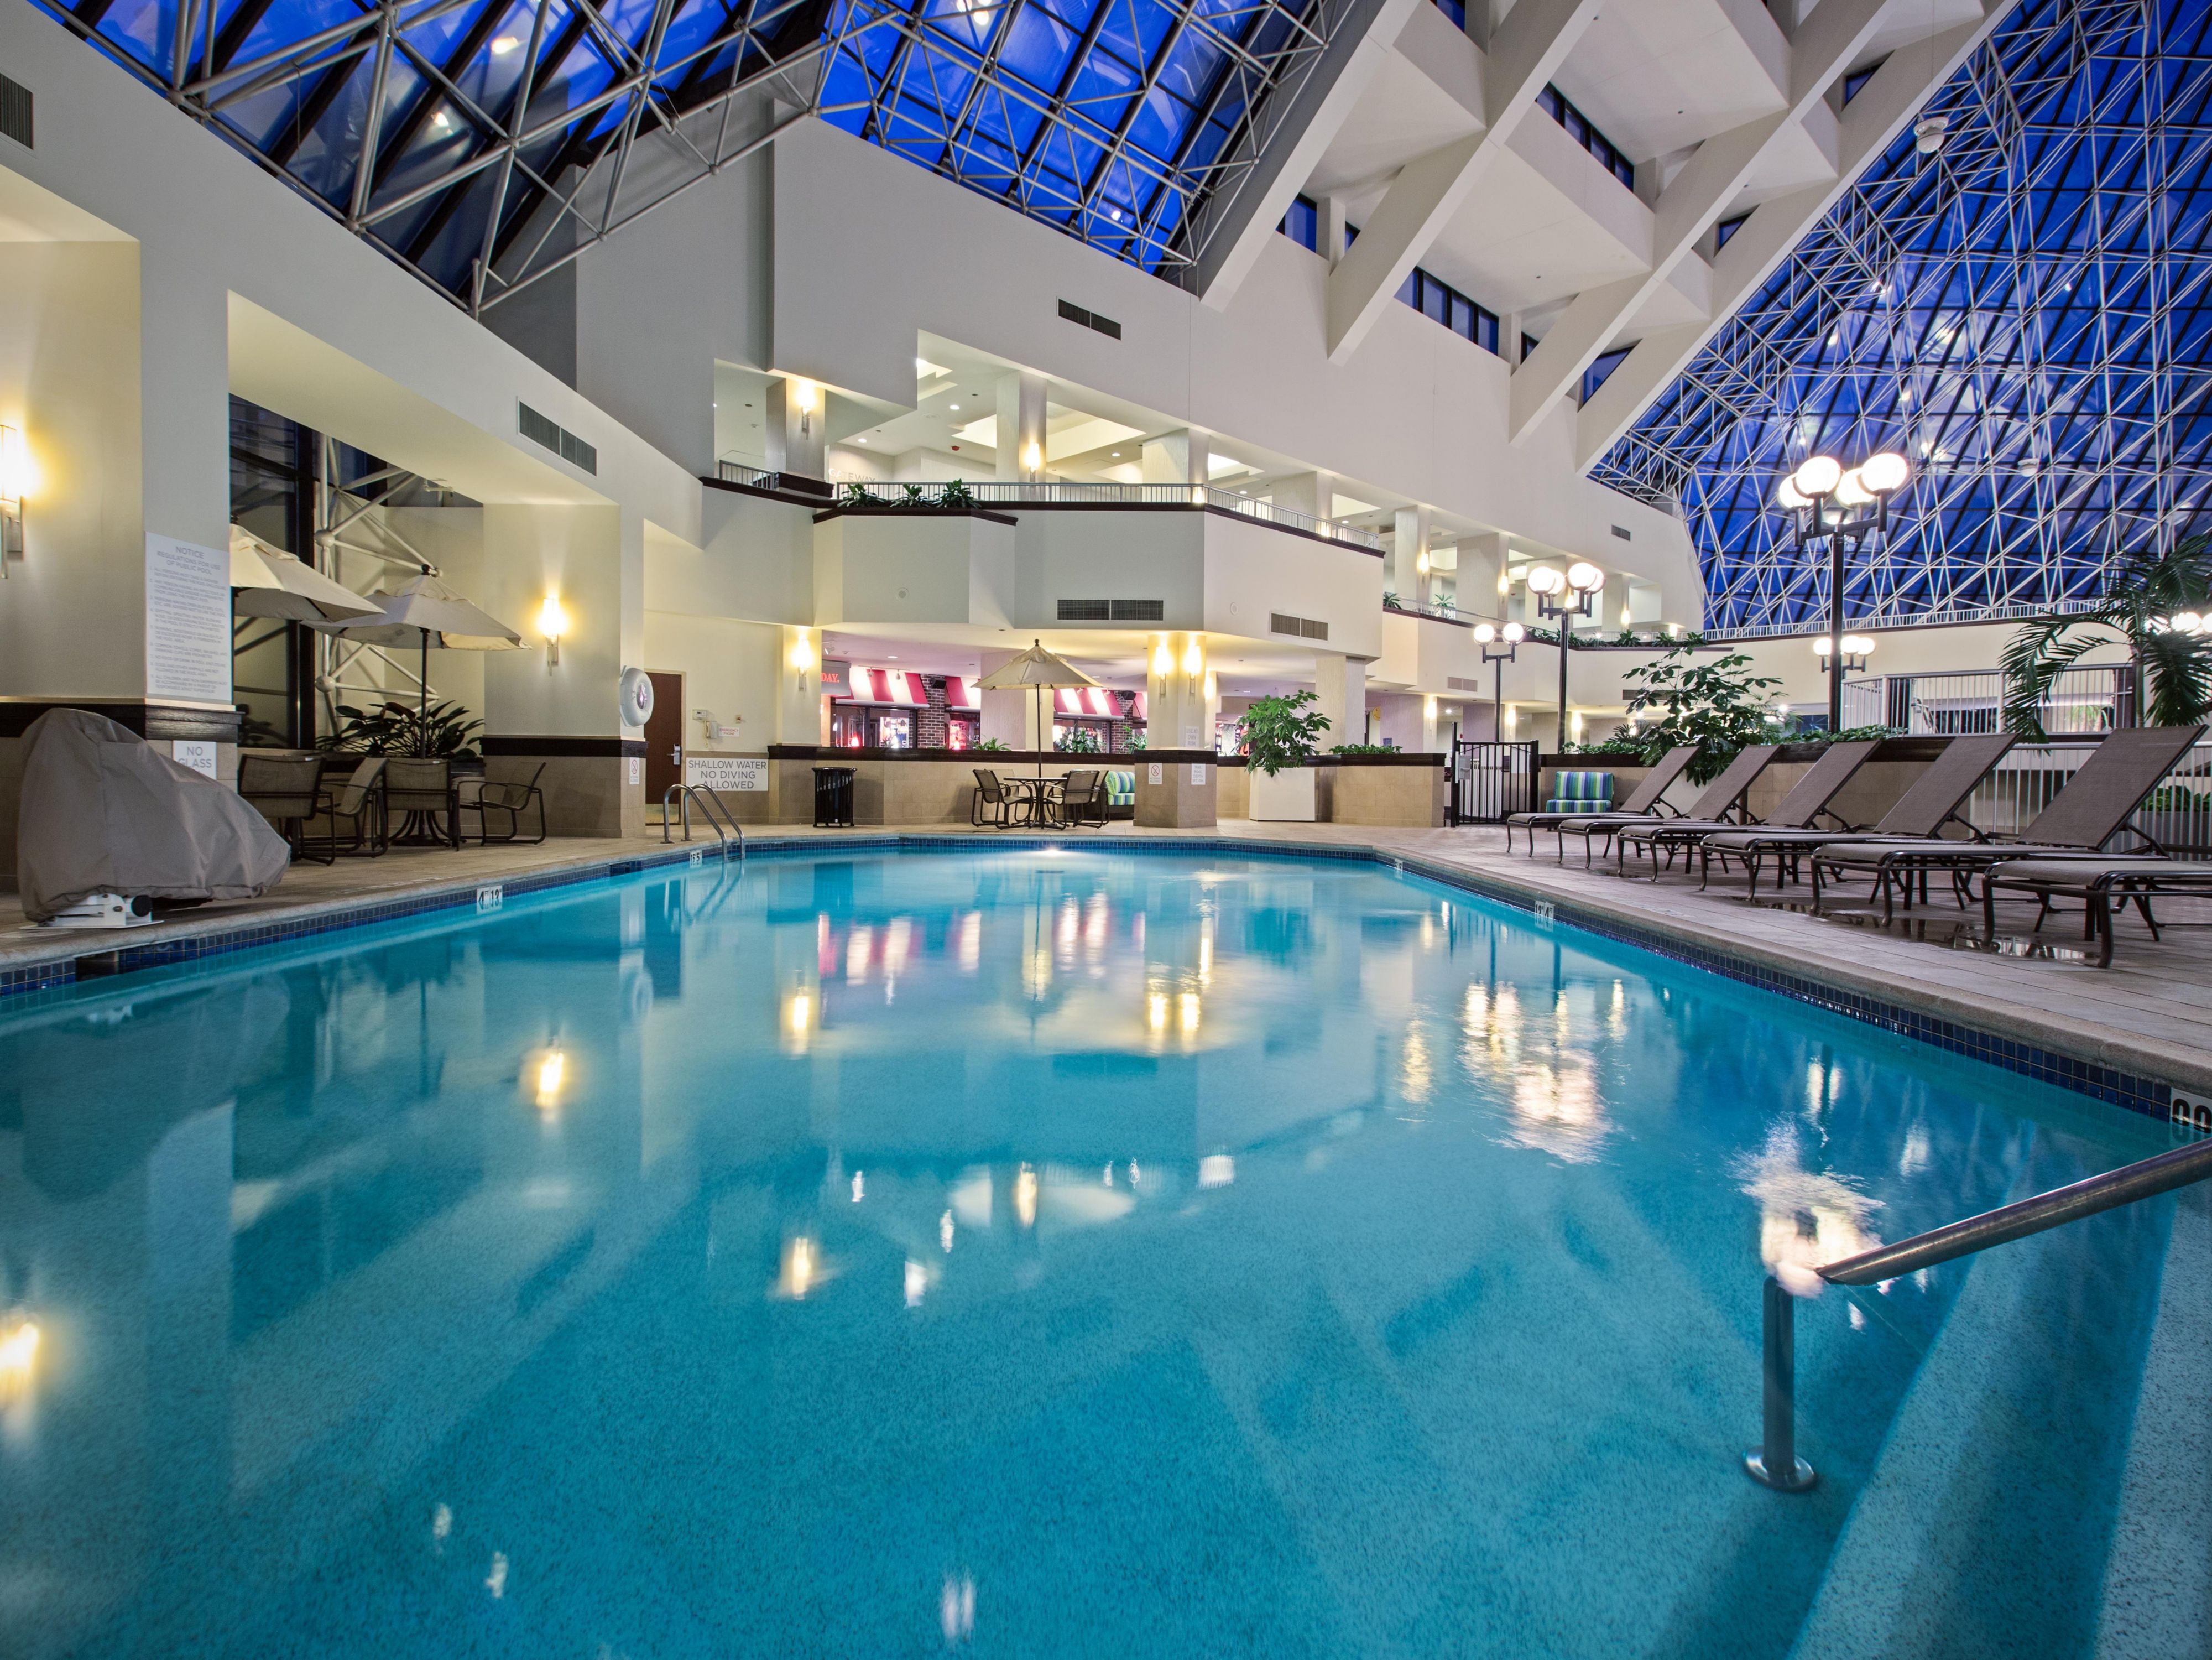 Relax and unwind at the Pool and Lobby Bar at Crowne Plaza® St. Louis Airport. Our indoor pool is perfect for a refreshing swim or a relaxing soak in the hot tub. Grab a drink at the bar and enjoy the ambiance of our open lobby atrium. It's the perfect place to relax after a long day.